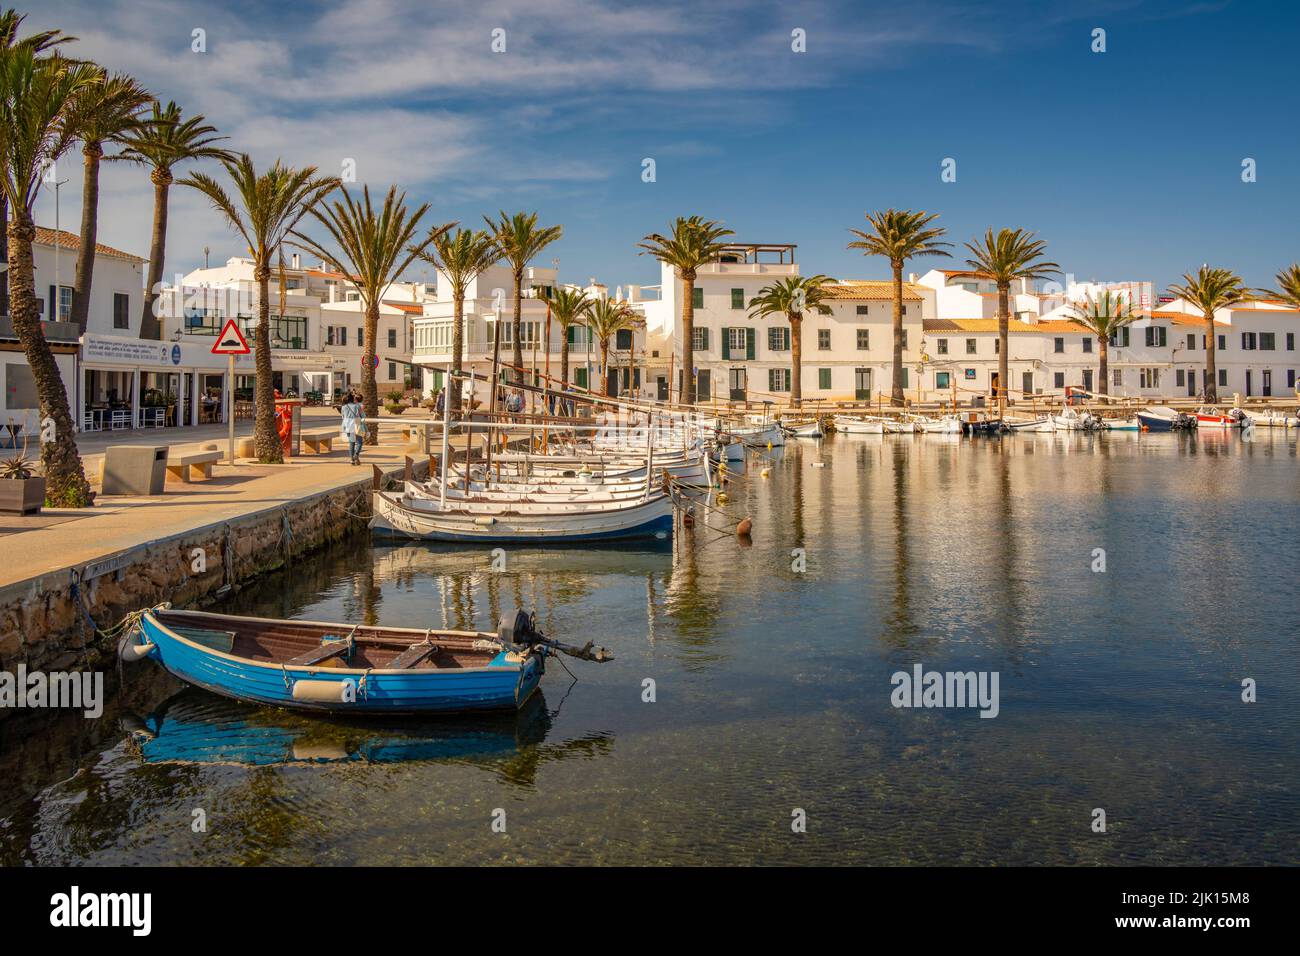 View of boats and palm trees in the marina and houses in Fornelles, Fornelles, Menorca, Balearic Islands, Spain, Mediterranean, Europe Stock Photo